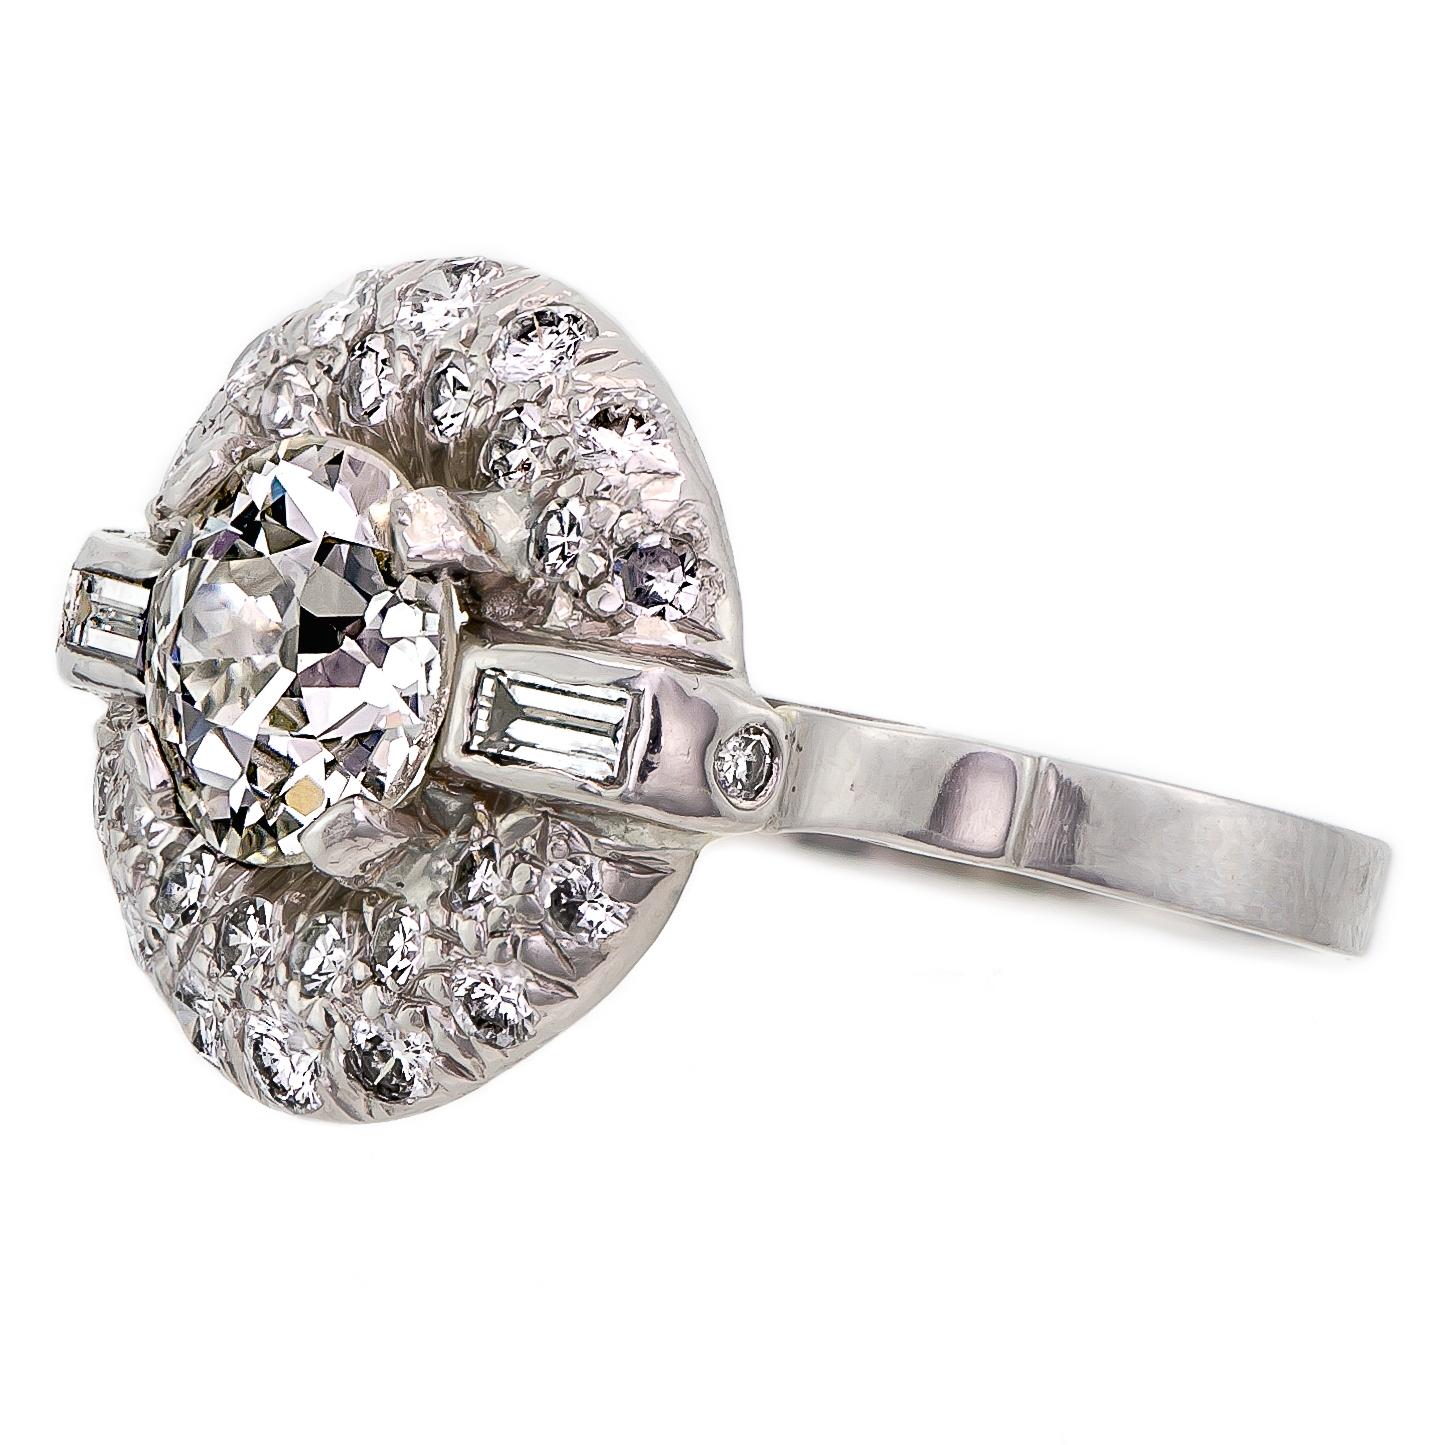 Eye-catching Art Deco platinum and diamond lady's ring containing one (1) dazzling prong set Old European Cut diamond surrounded by twelve (12) sparkling pave set single cut diamonds encircled by a row of fourteen (14) round brilliant cut diamonds